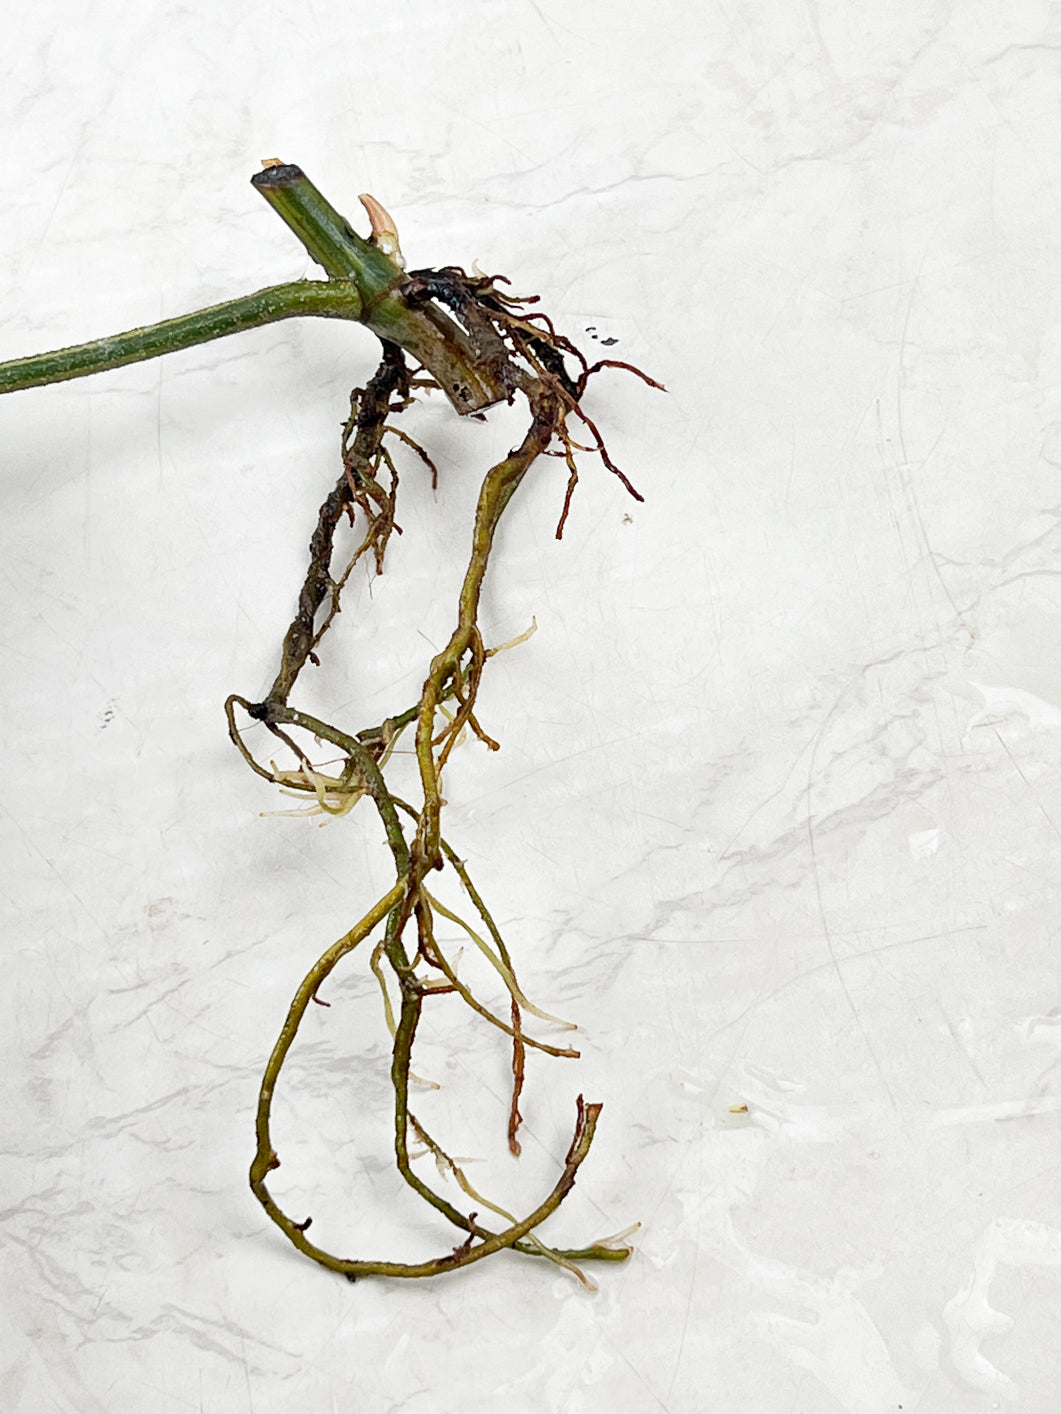 Philodendron Florida Beauty slightly rooted node with an active sprout (Leafless)